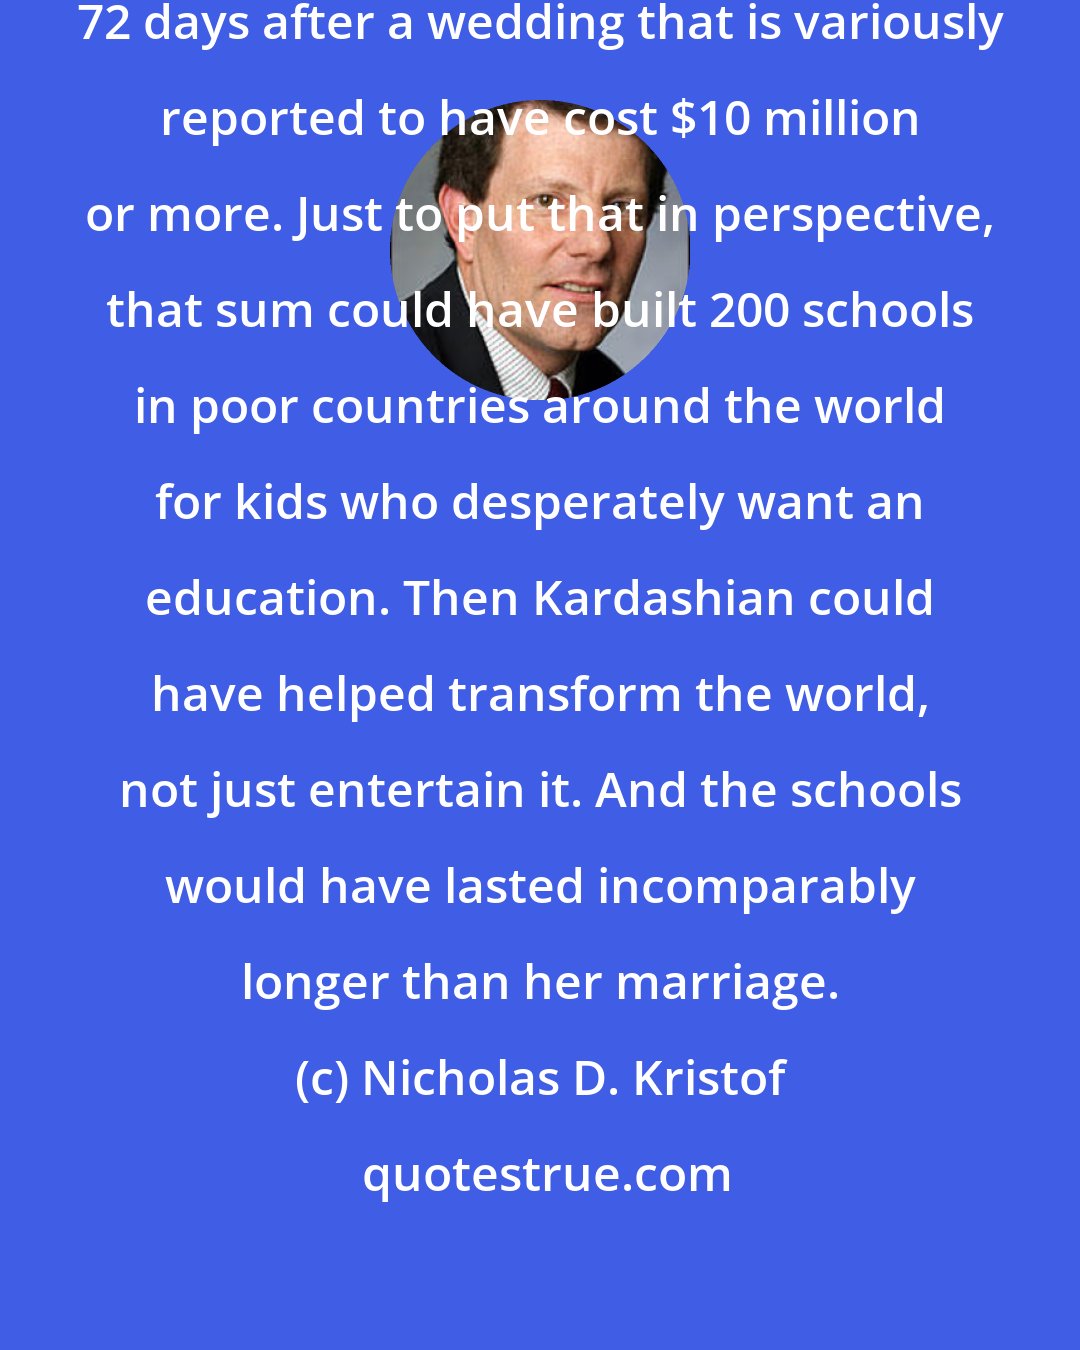 Nicholas D. Kristof: So Kim Kardashian is getting a divorce, 72 days after a wedding that is variously reported to have cost $10 million or more. Just to put that in perspective, that sum could have built 200 schools in poor countries around the world for kids who desperately want an education. Then Kardashian could have helped transform the world, not just entertain it. And the schools would have lasted incomparably longer than her marriage.